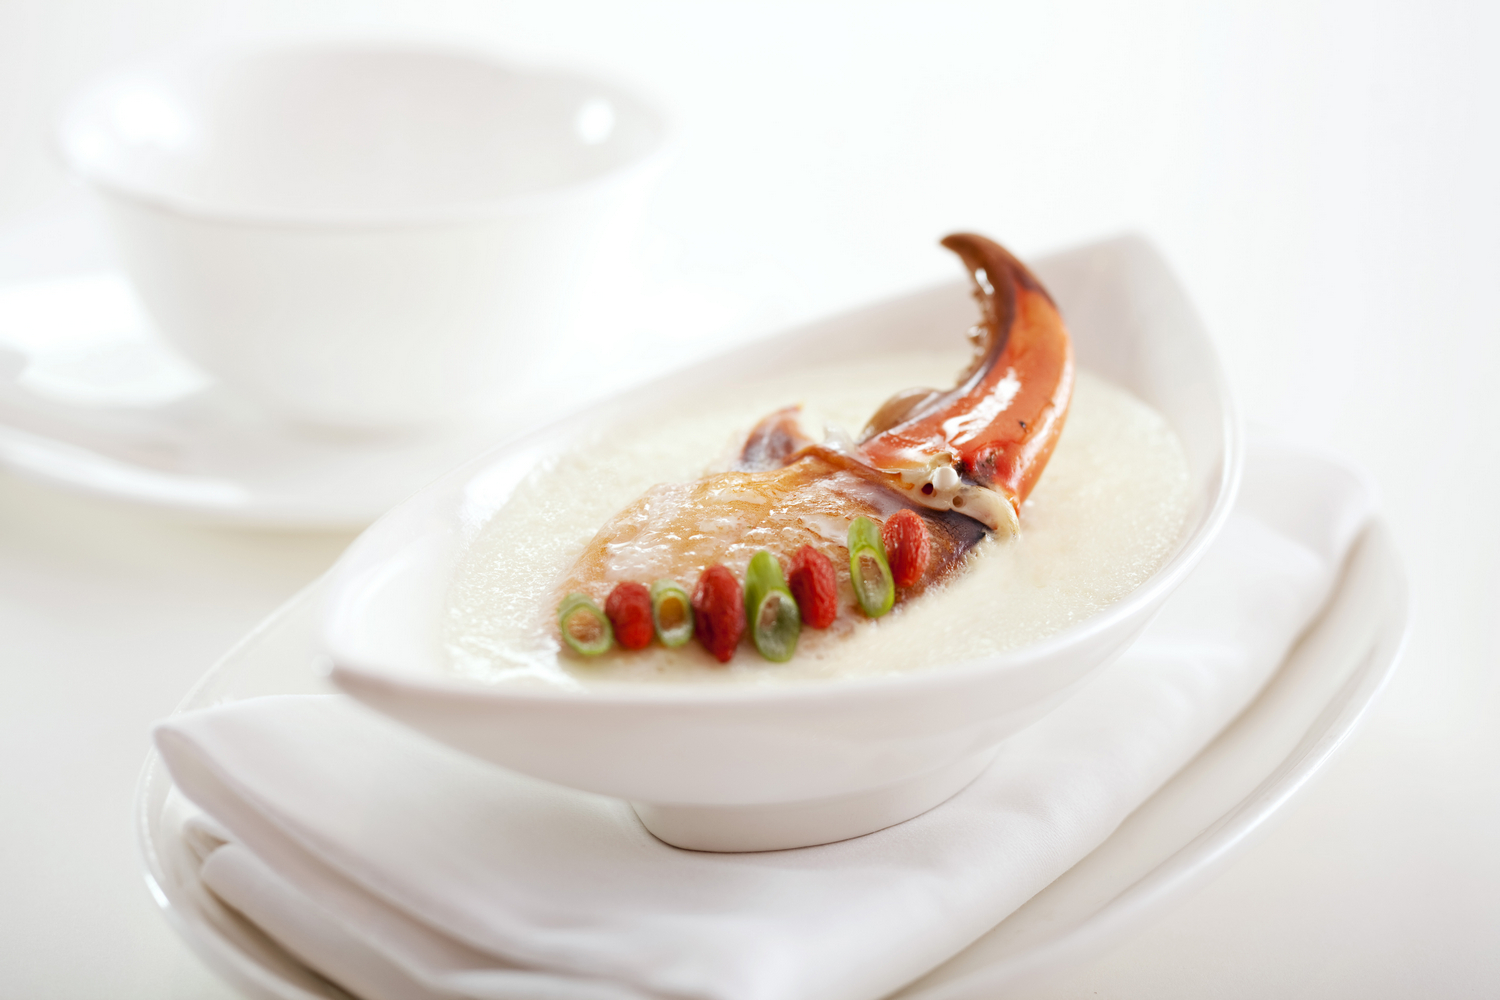 Hoi King Heen - Steamed crab claw with egg white in Far Dew Chinese wine 海景軒 - 花雕蛋白蒸蟹拑_1500x1000